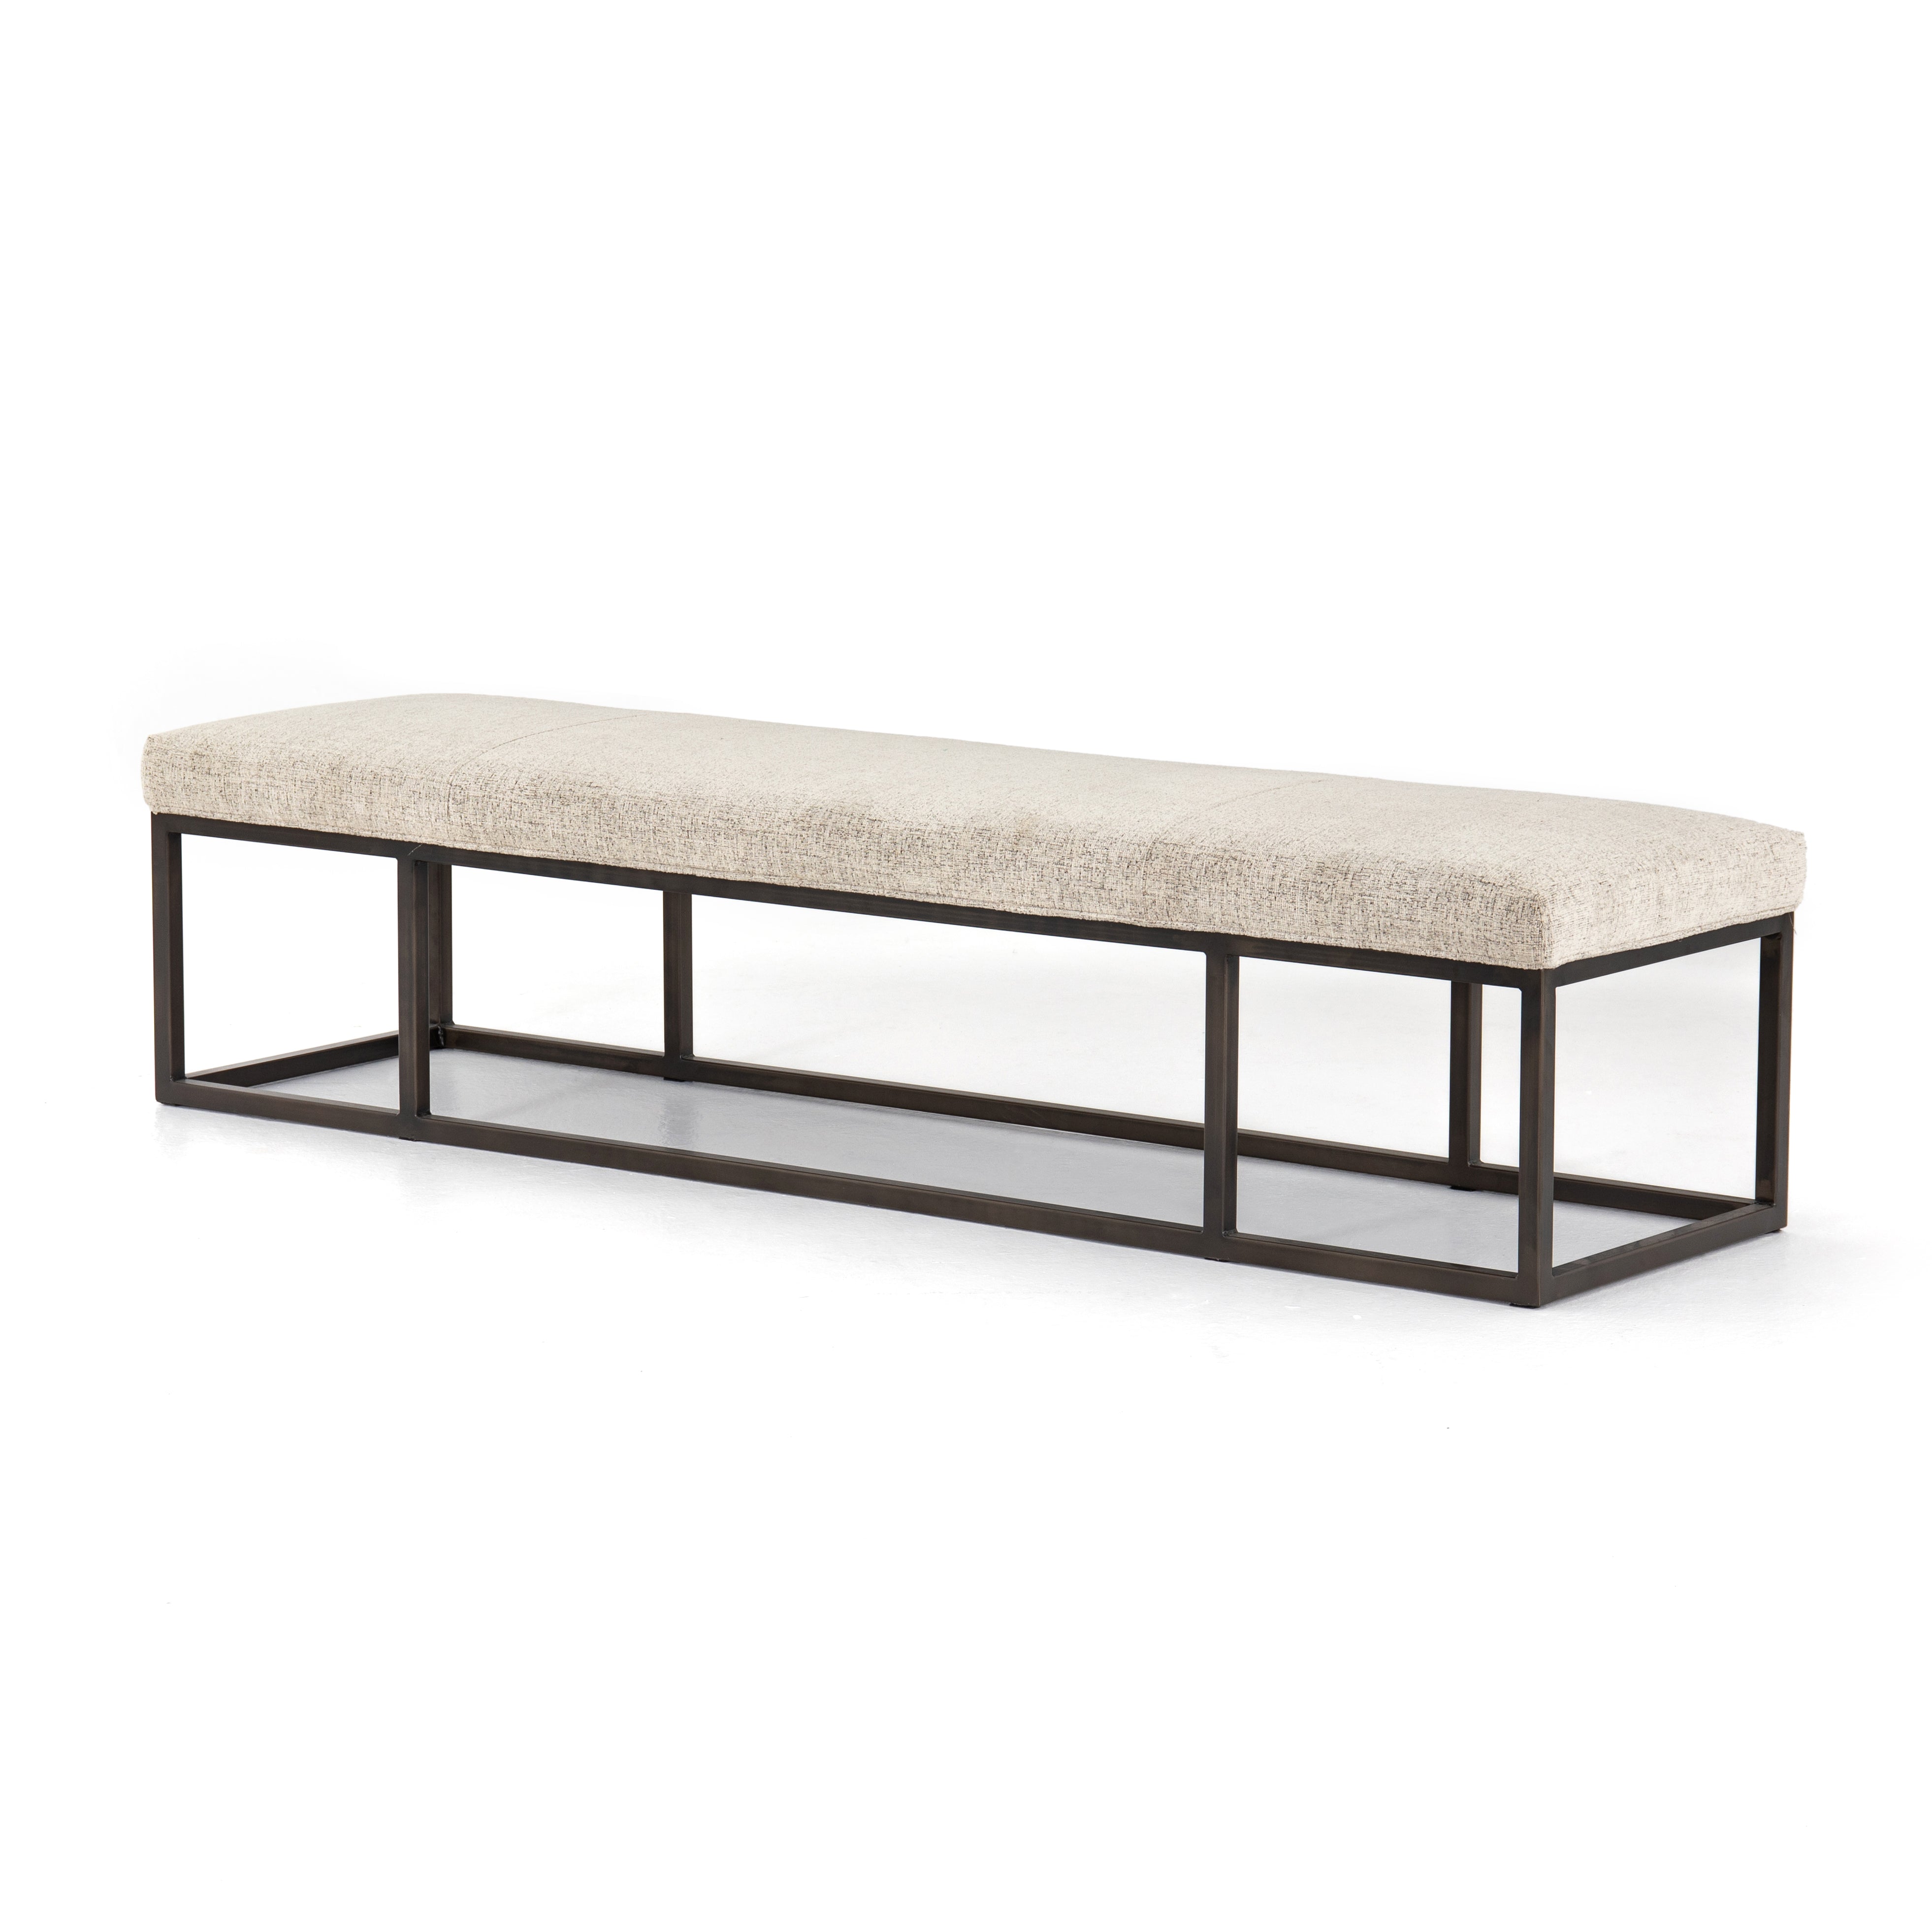 The Beaumont Plushtone Linen Bench has streamlined shaping and is textural to the touch. Gunmetal-finished iron framing stands slim and structured to support a well-tailored top of plush, linen-like upholstery. Open, adaptable styling allows for versatile placement options.  Size: 72"w x 20"d x 17"h